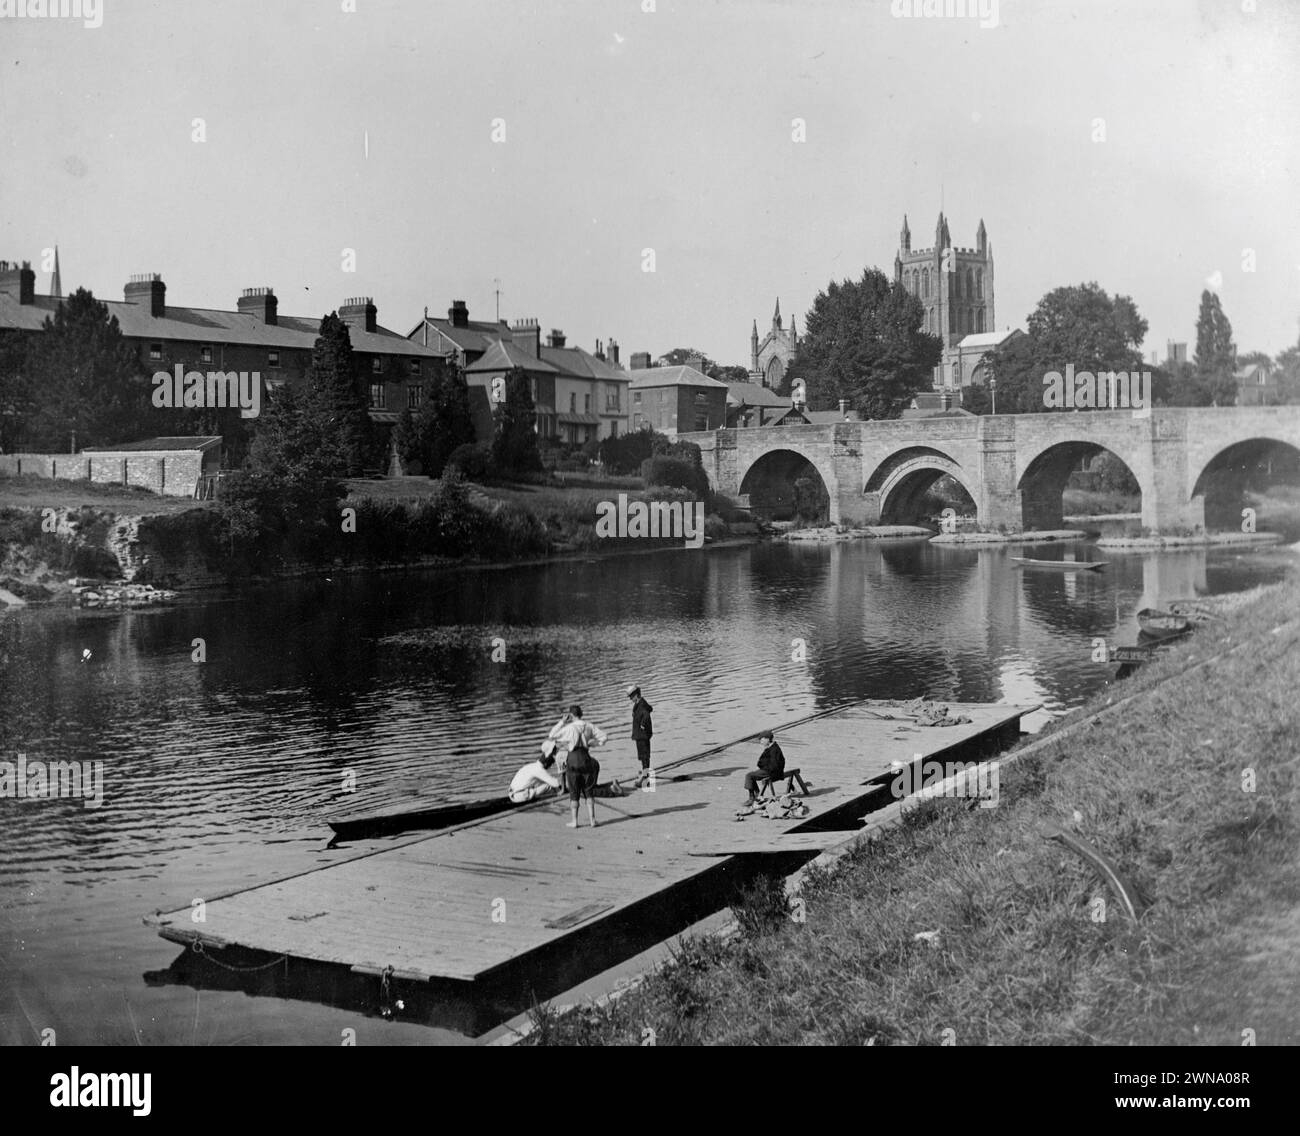 1897 Historic Black and White Photograph of  a Landing Stage on the the River Wye with Wye Bridge and Cathedral, Hereford, Herefordshire, England, UK Stock Photo